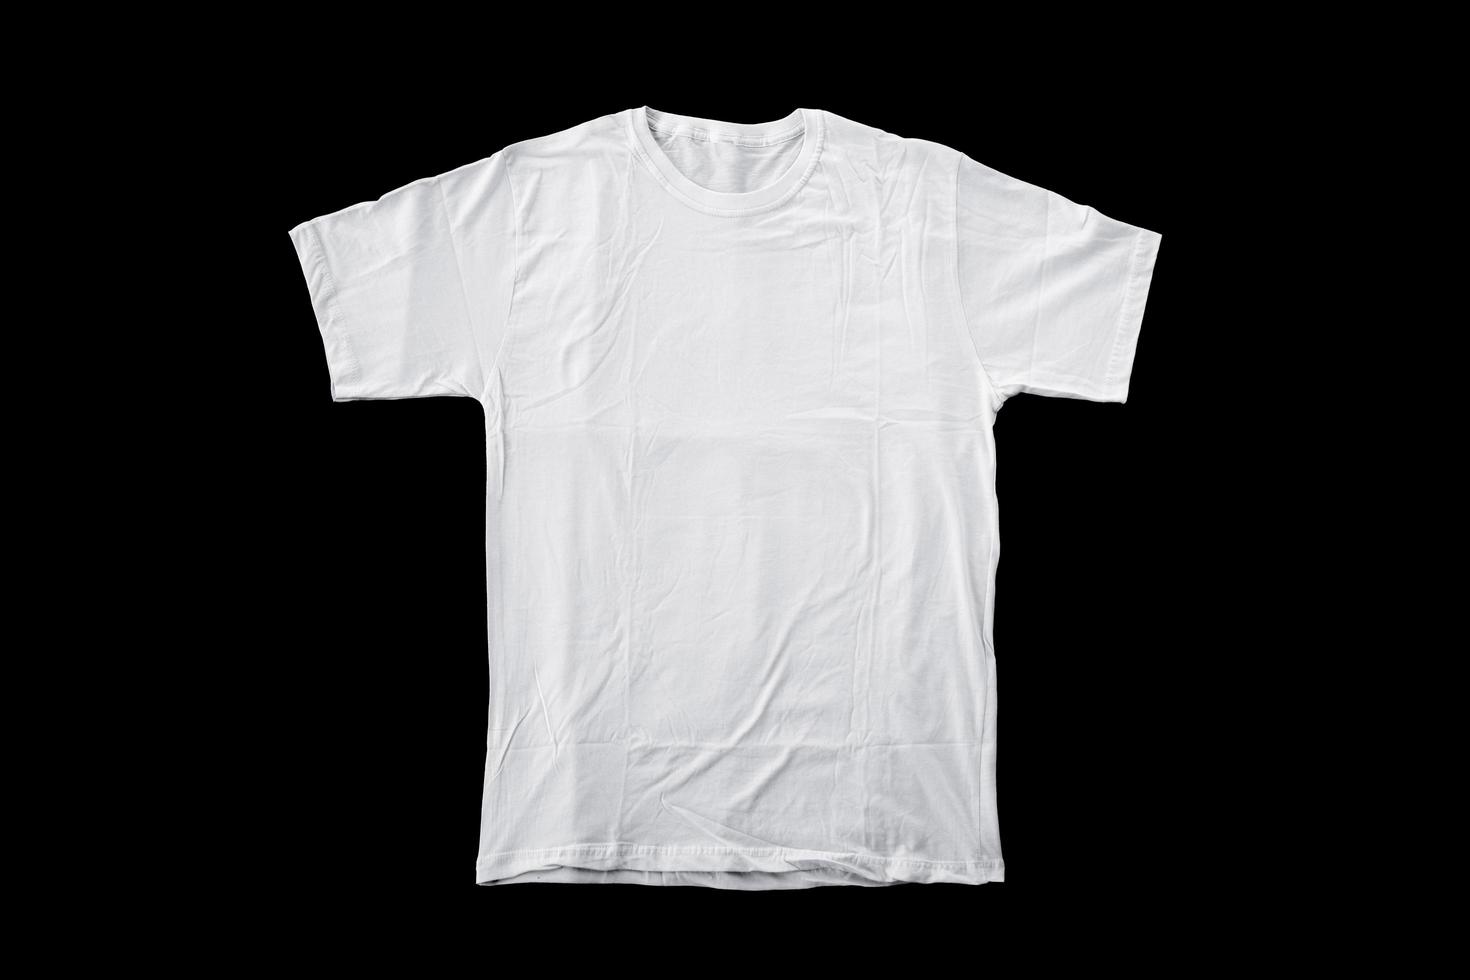 Short-sleeved white t-shirts for mockups. plain t-shirt with black background for design preview. photo